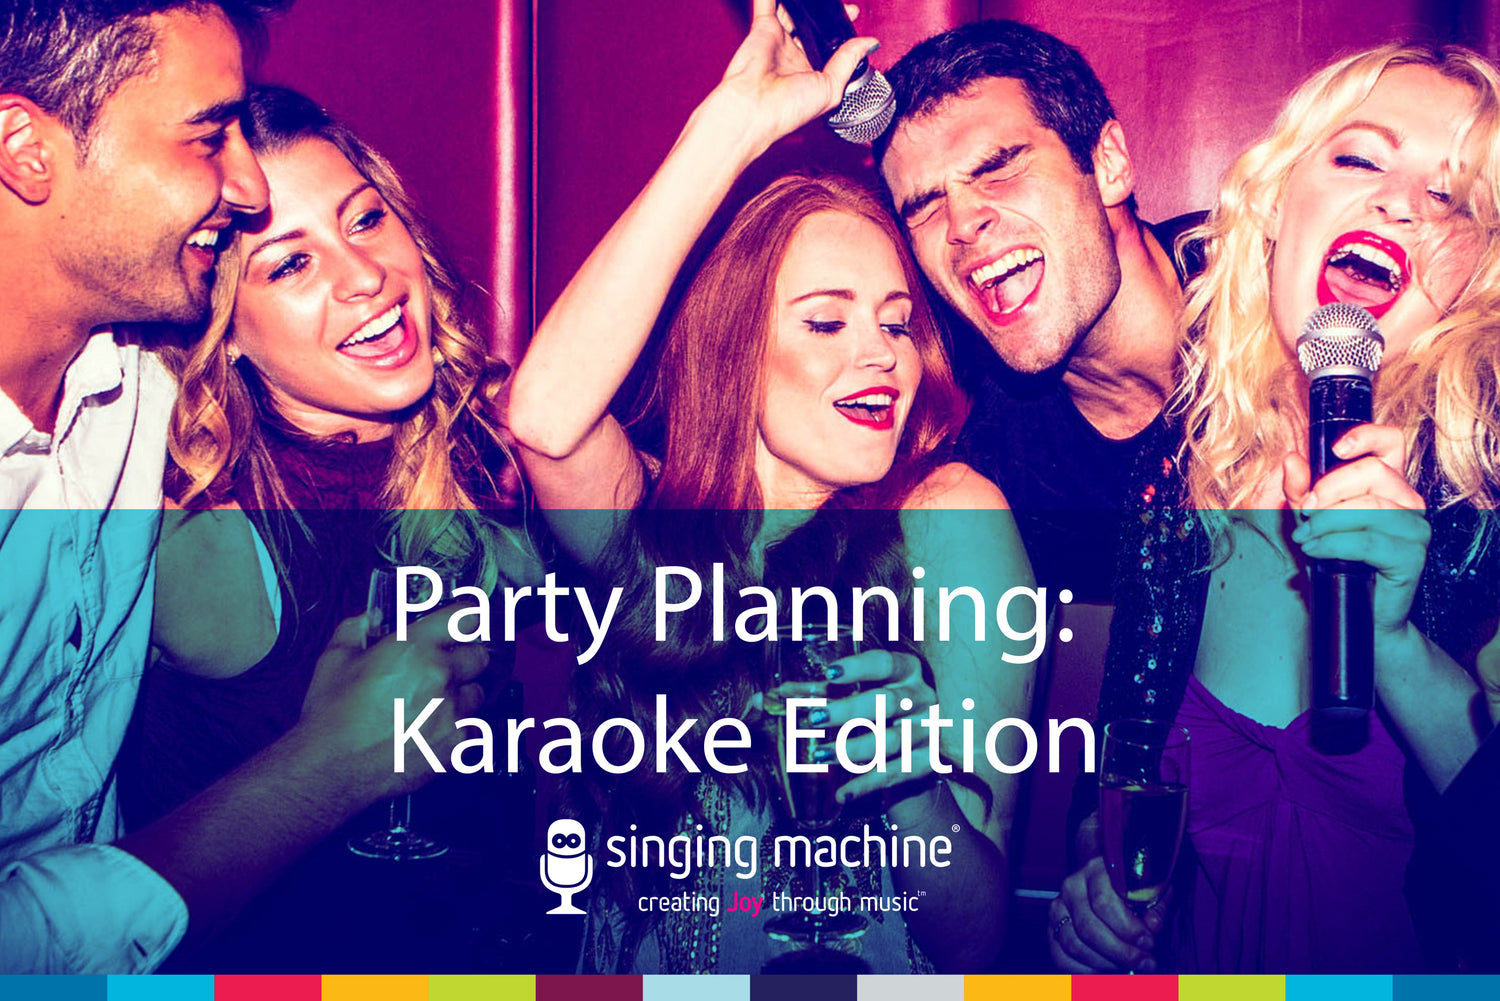 Party Planning: Karaoke Edition